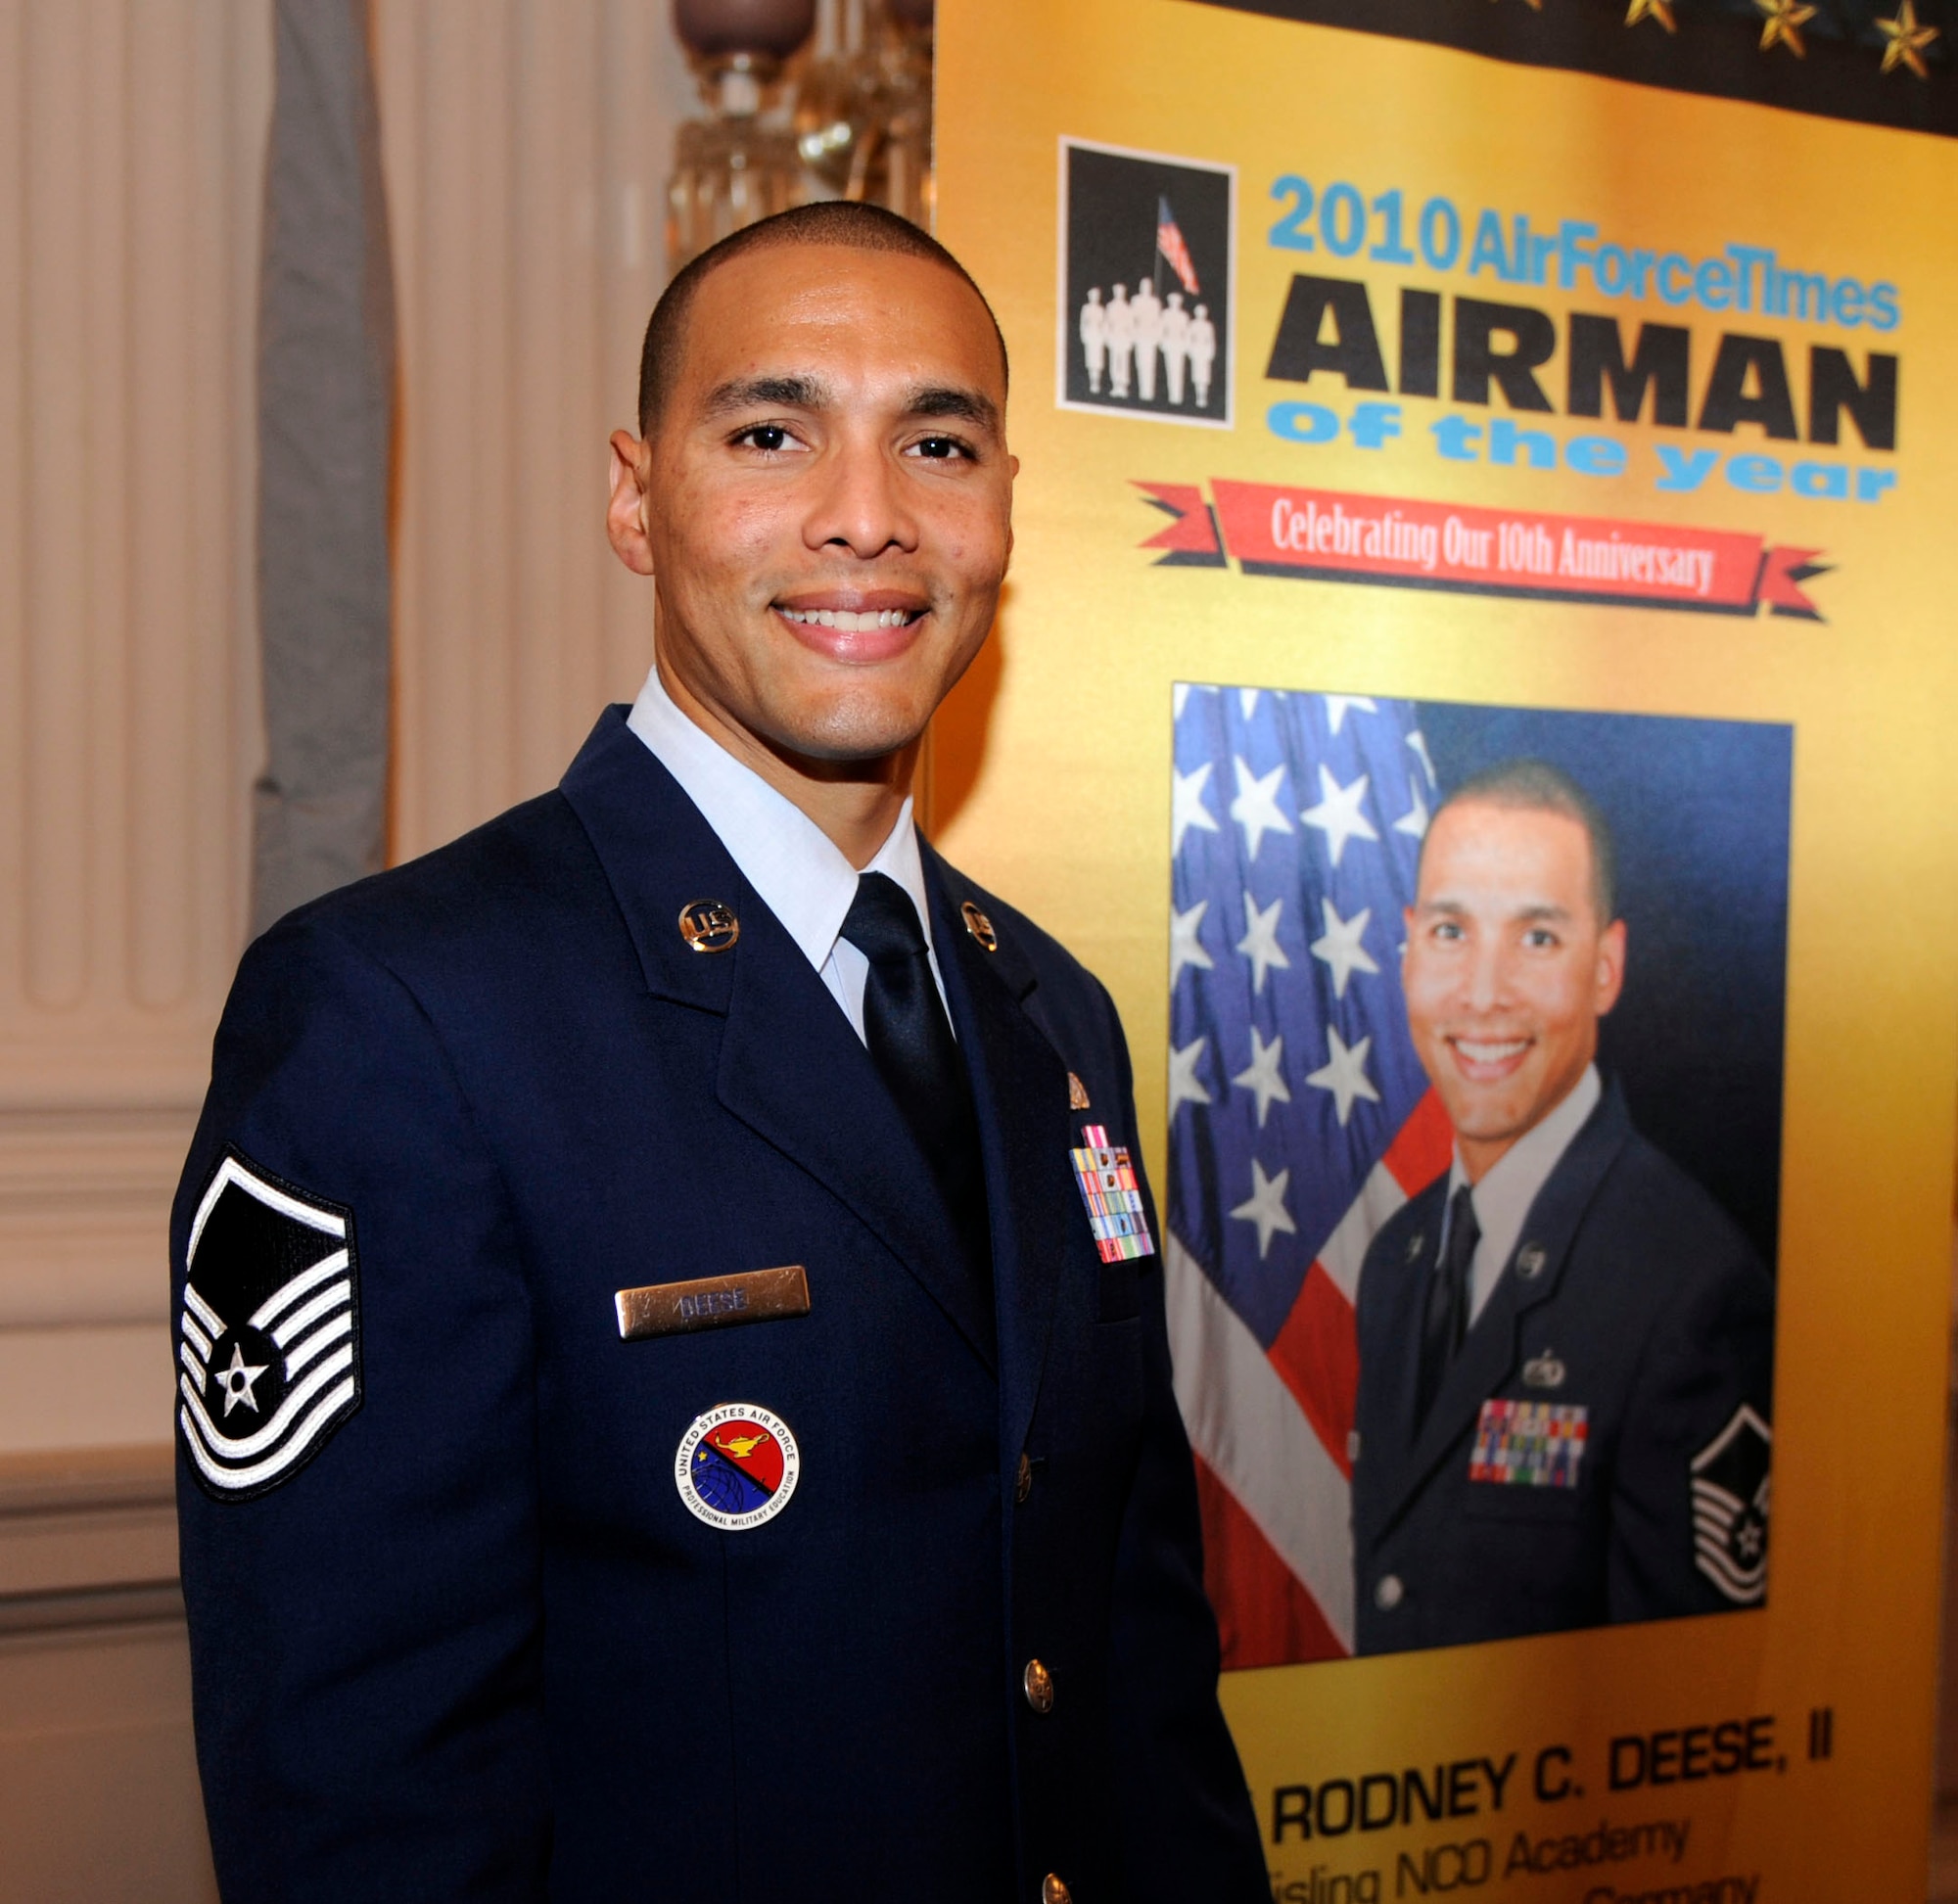 Master Sgt. Rodney C. Deese II, assigned to the Kisling NCO Academy at Ramstein Air Base, Germany, is the 2010 Air Force Times Airman of the Year.  He received the award July 14, 2020, at the Military Times Service Member of the Year Awards ceremony at the Cannon House Office Building in Washington D.C.  (U.S. Air Force photo/Andy Morataya)